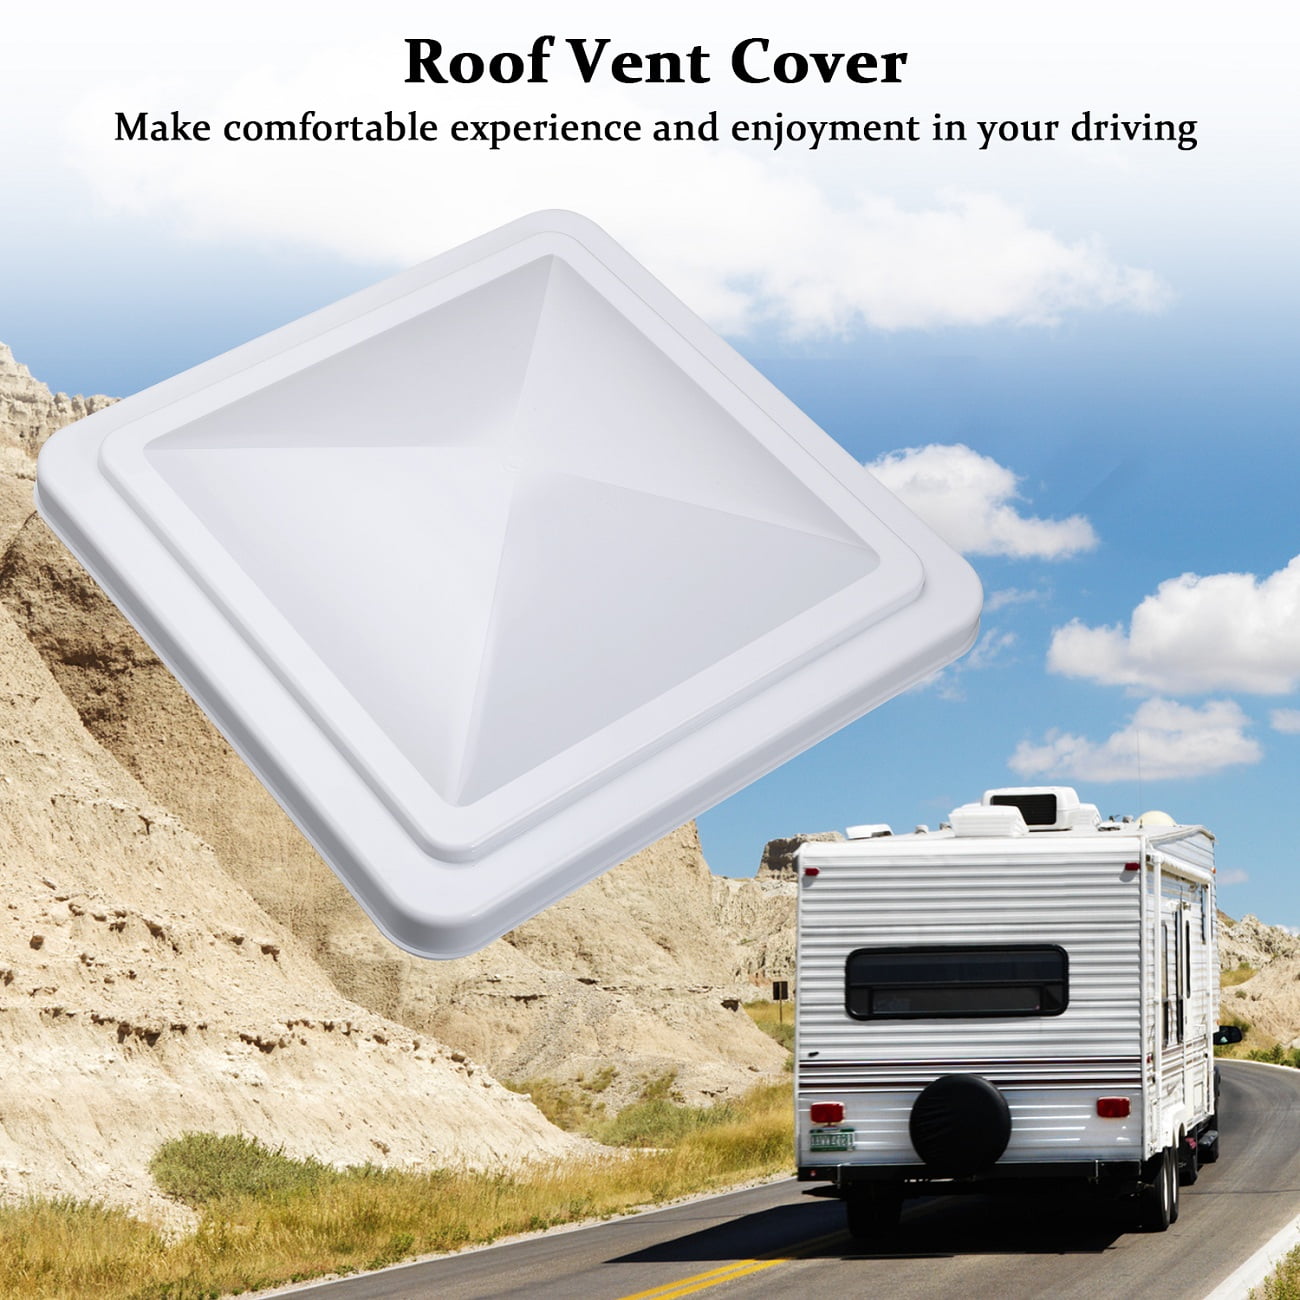 Trailer 3 pack 14"X14" RV Replacement Roof Vent Cover White Camper Vent Cover